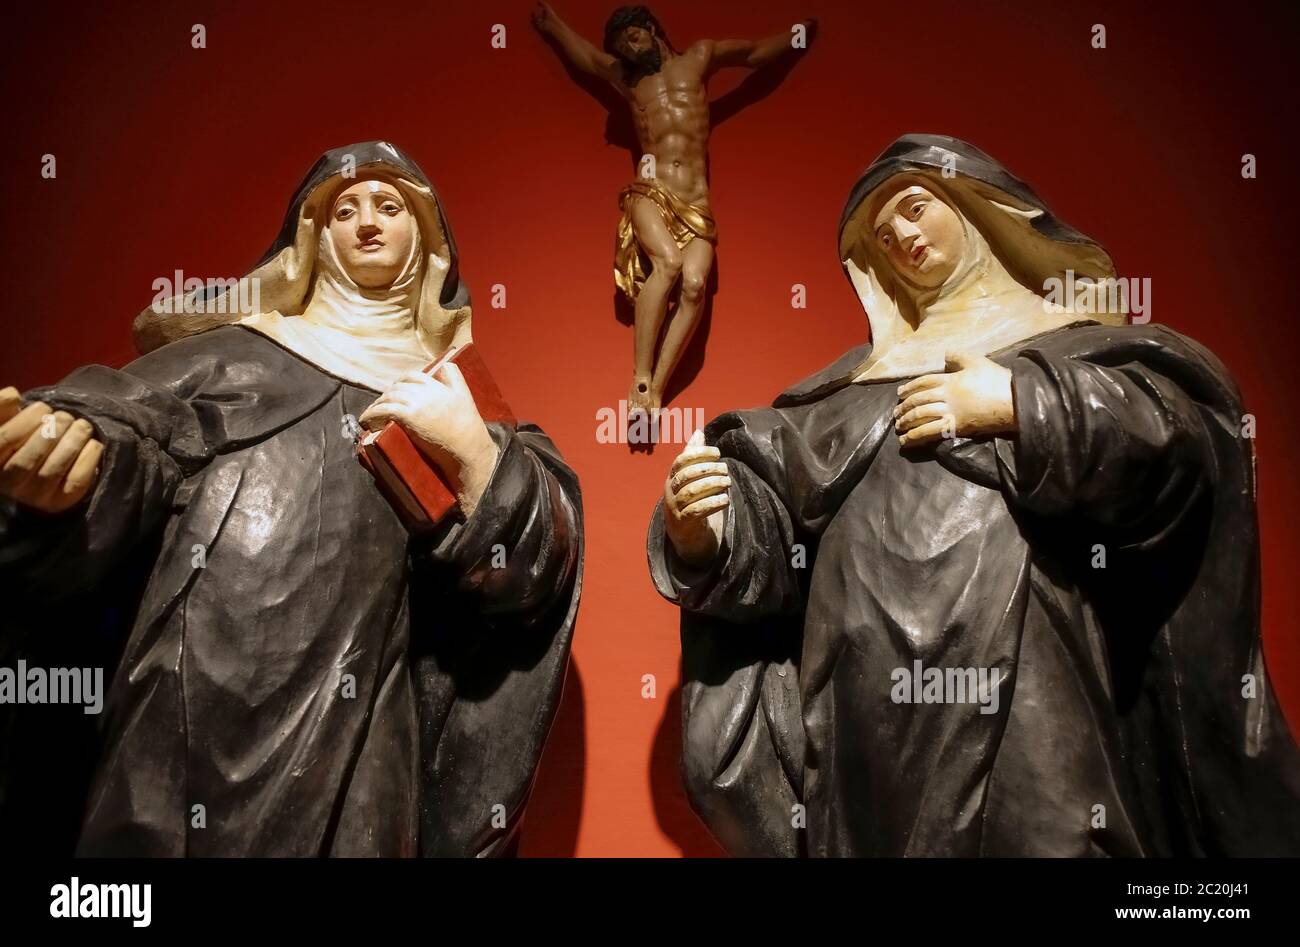 Italy Lombardy Sabbioneta - Holy art Museum - Virgins of the Mantellate order - Beata Albaverde di Sabbioneta,  Beata Illuminata di Sabbioneta - carved and painted wood - 18th century South Tyrolean sculptor Stock Photo